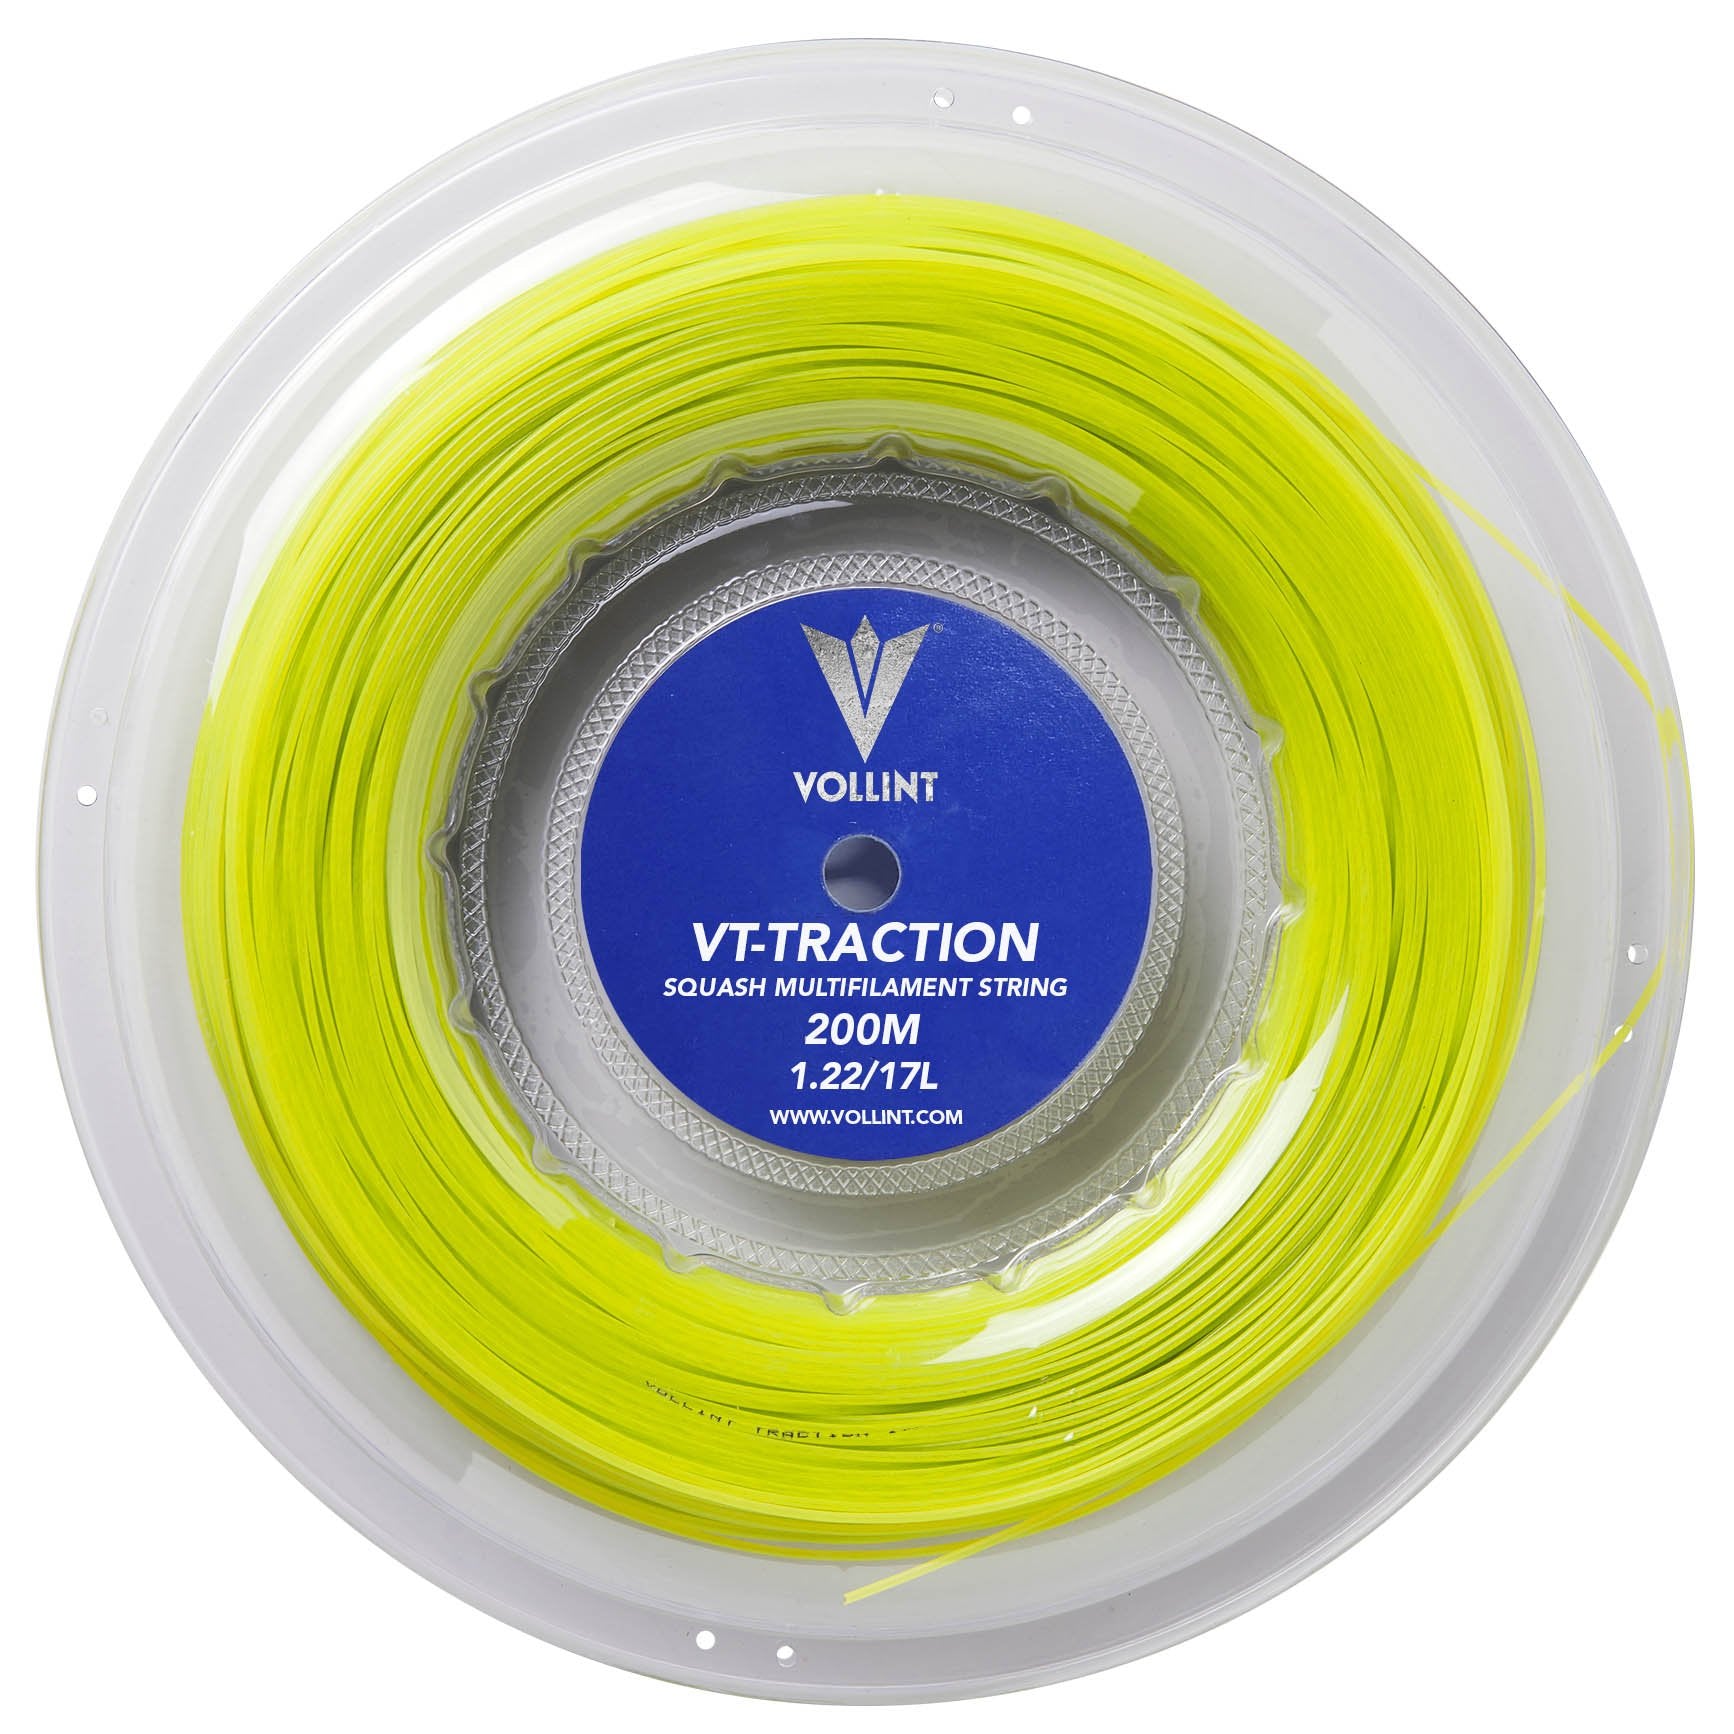 Vollint VT-Traction Squash String - 200m Reel from Sweatband.com